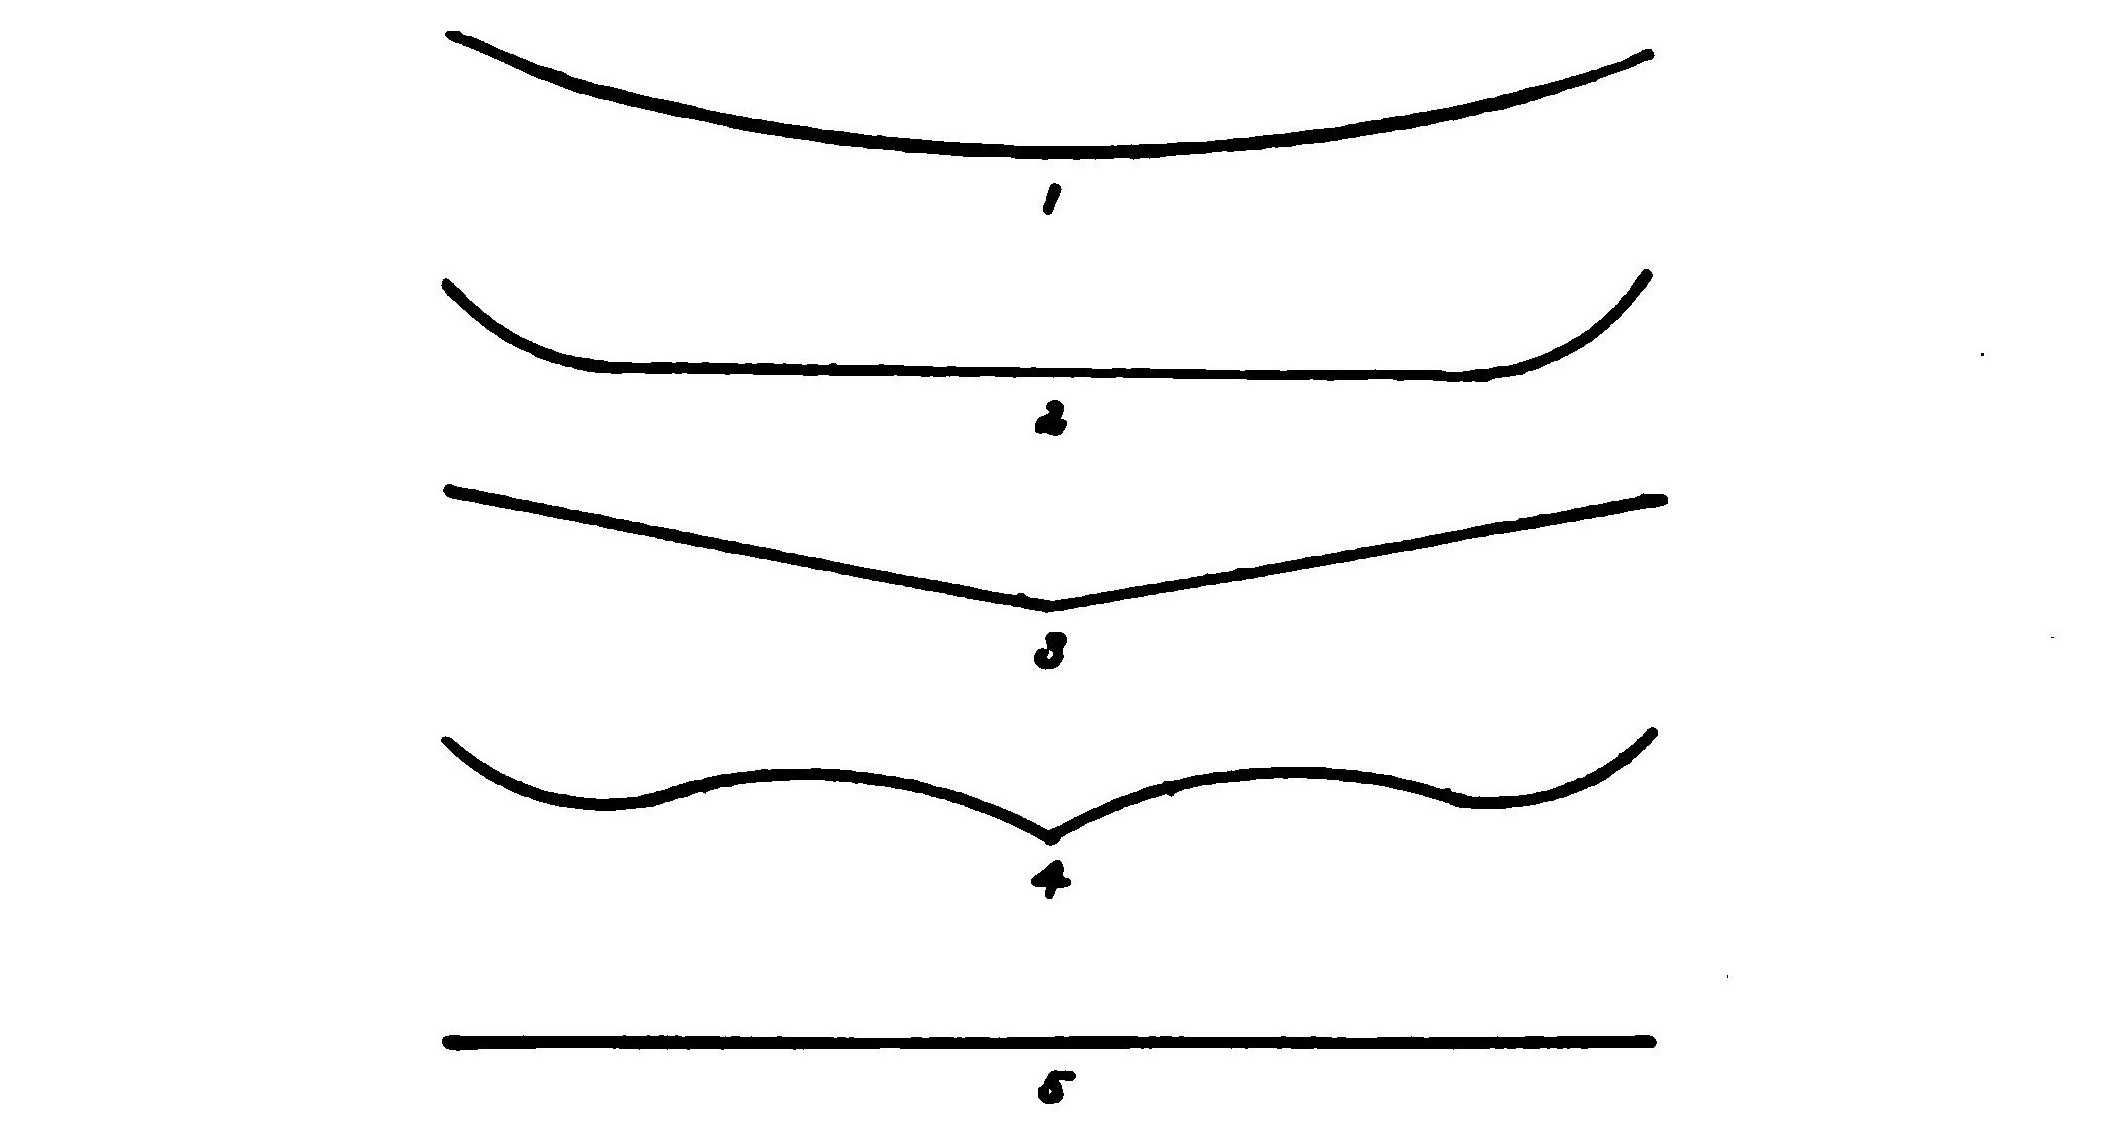 FIG. 18. An edgewise view of several planes showing the different ways they may be bent to secure stability.